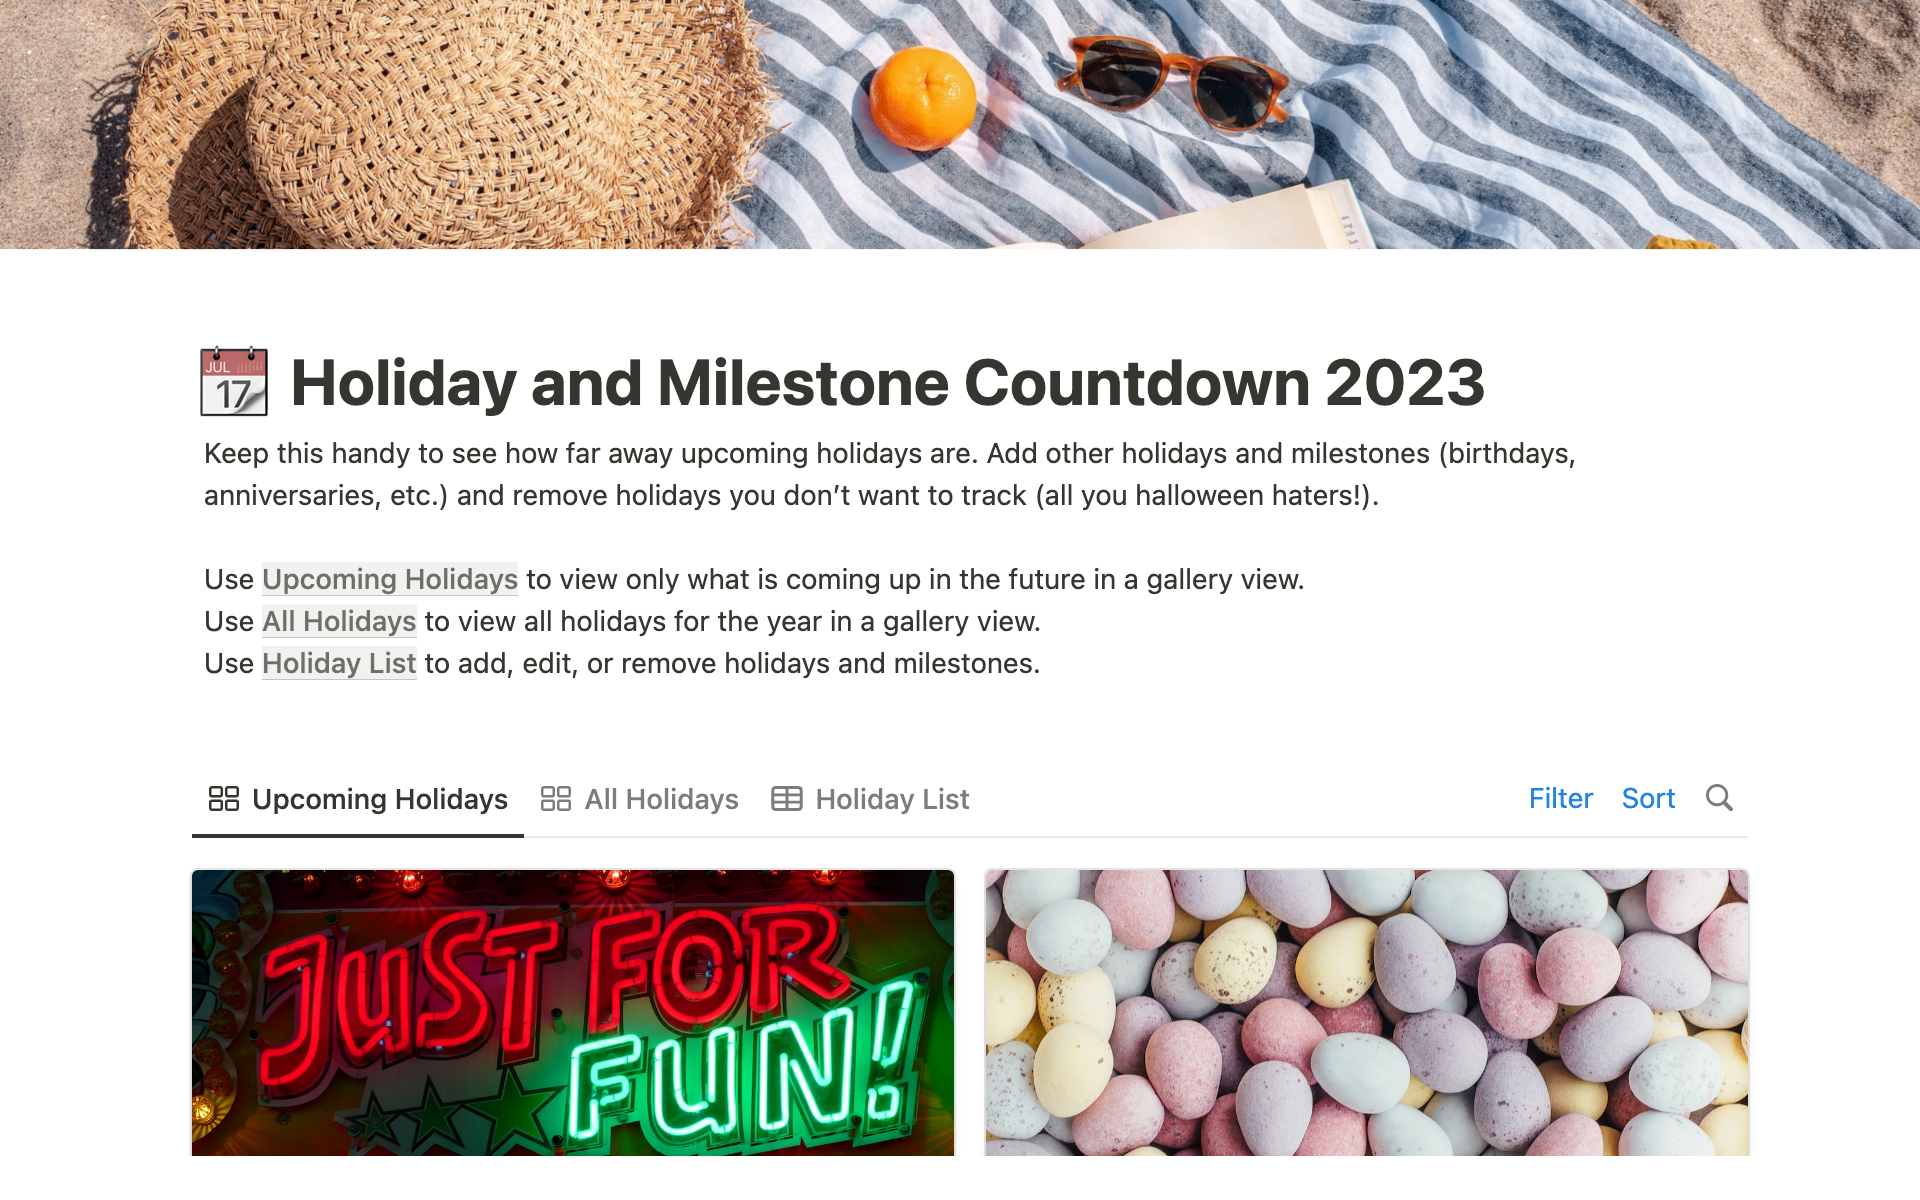 Allows people to see when upcoming holidays and birthday (and other milestones) are in a fun gallery view.